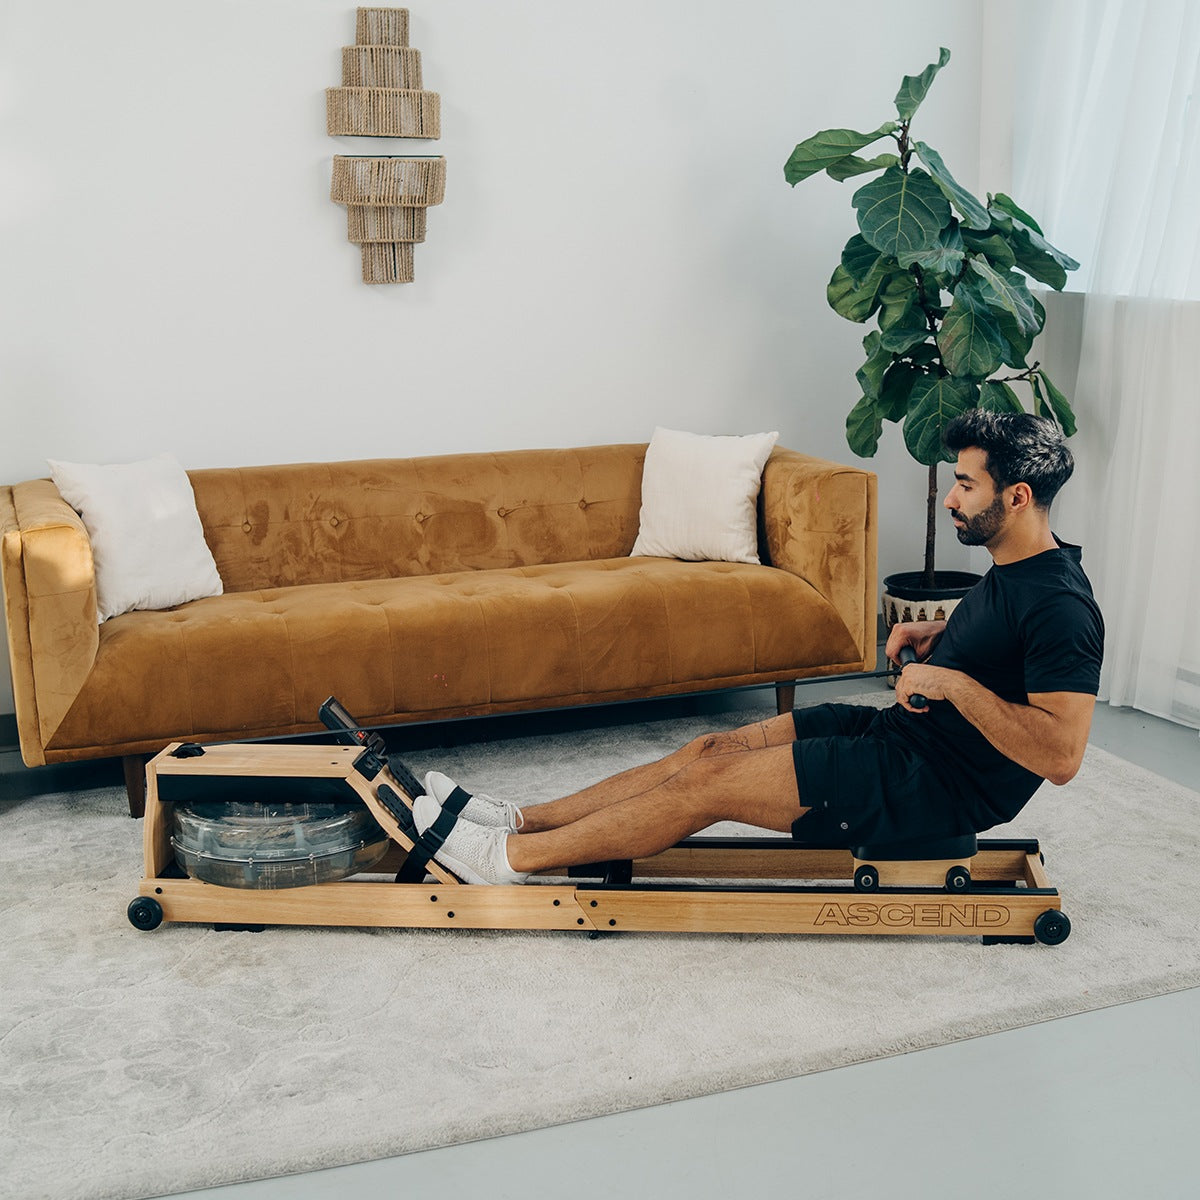 Ascend R-300 Foldable Wooden Water Rower